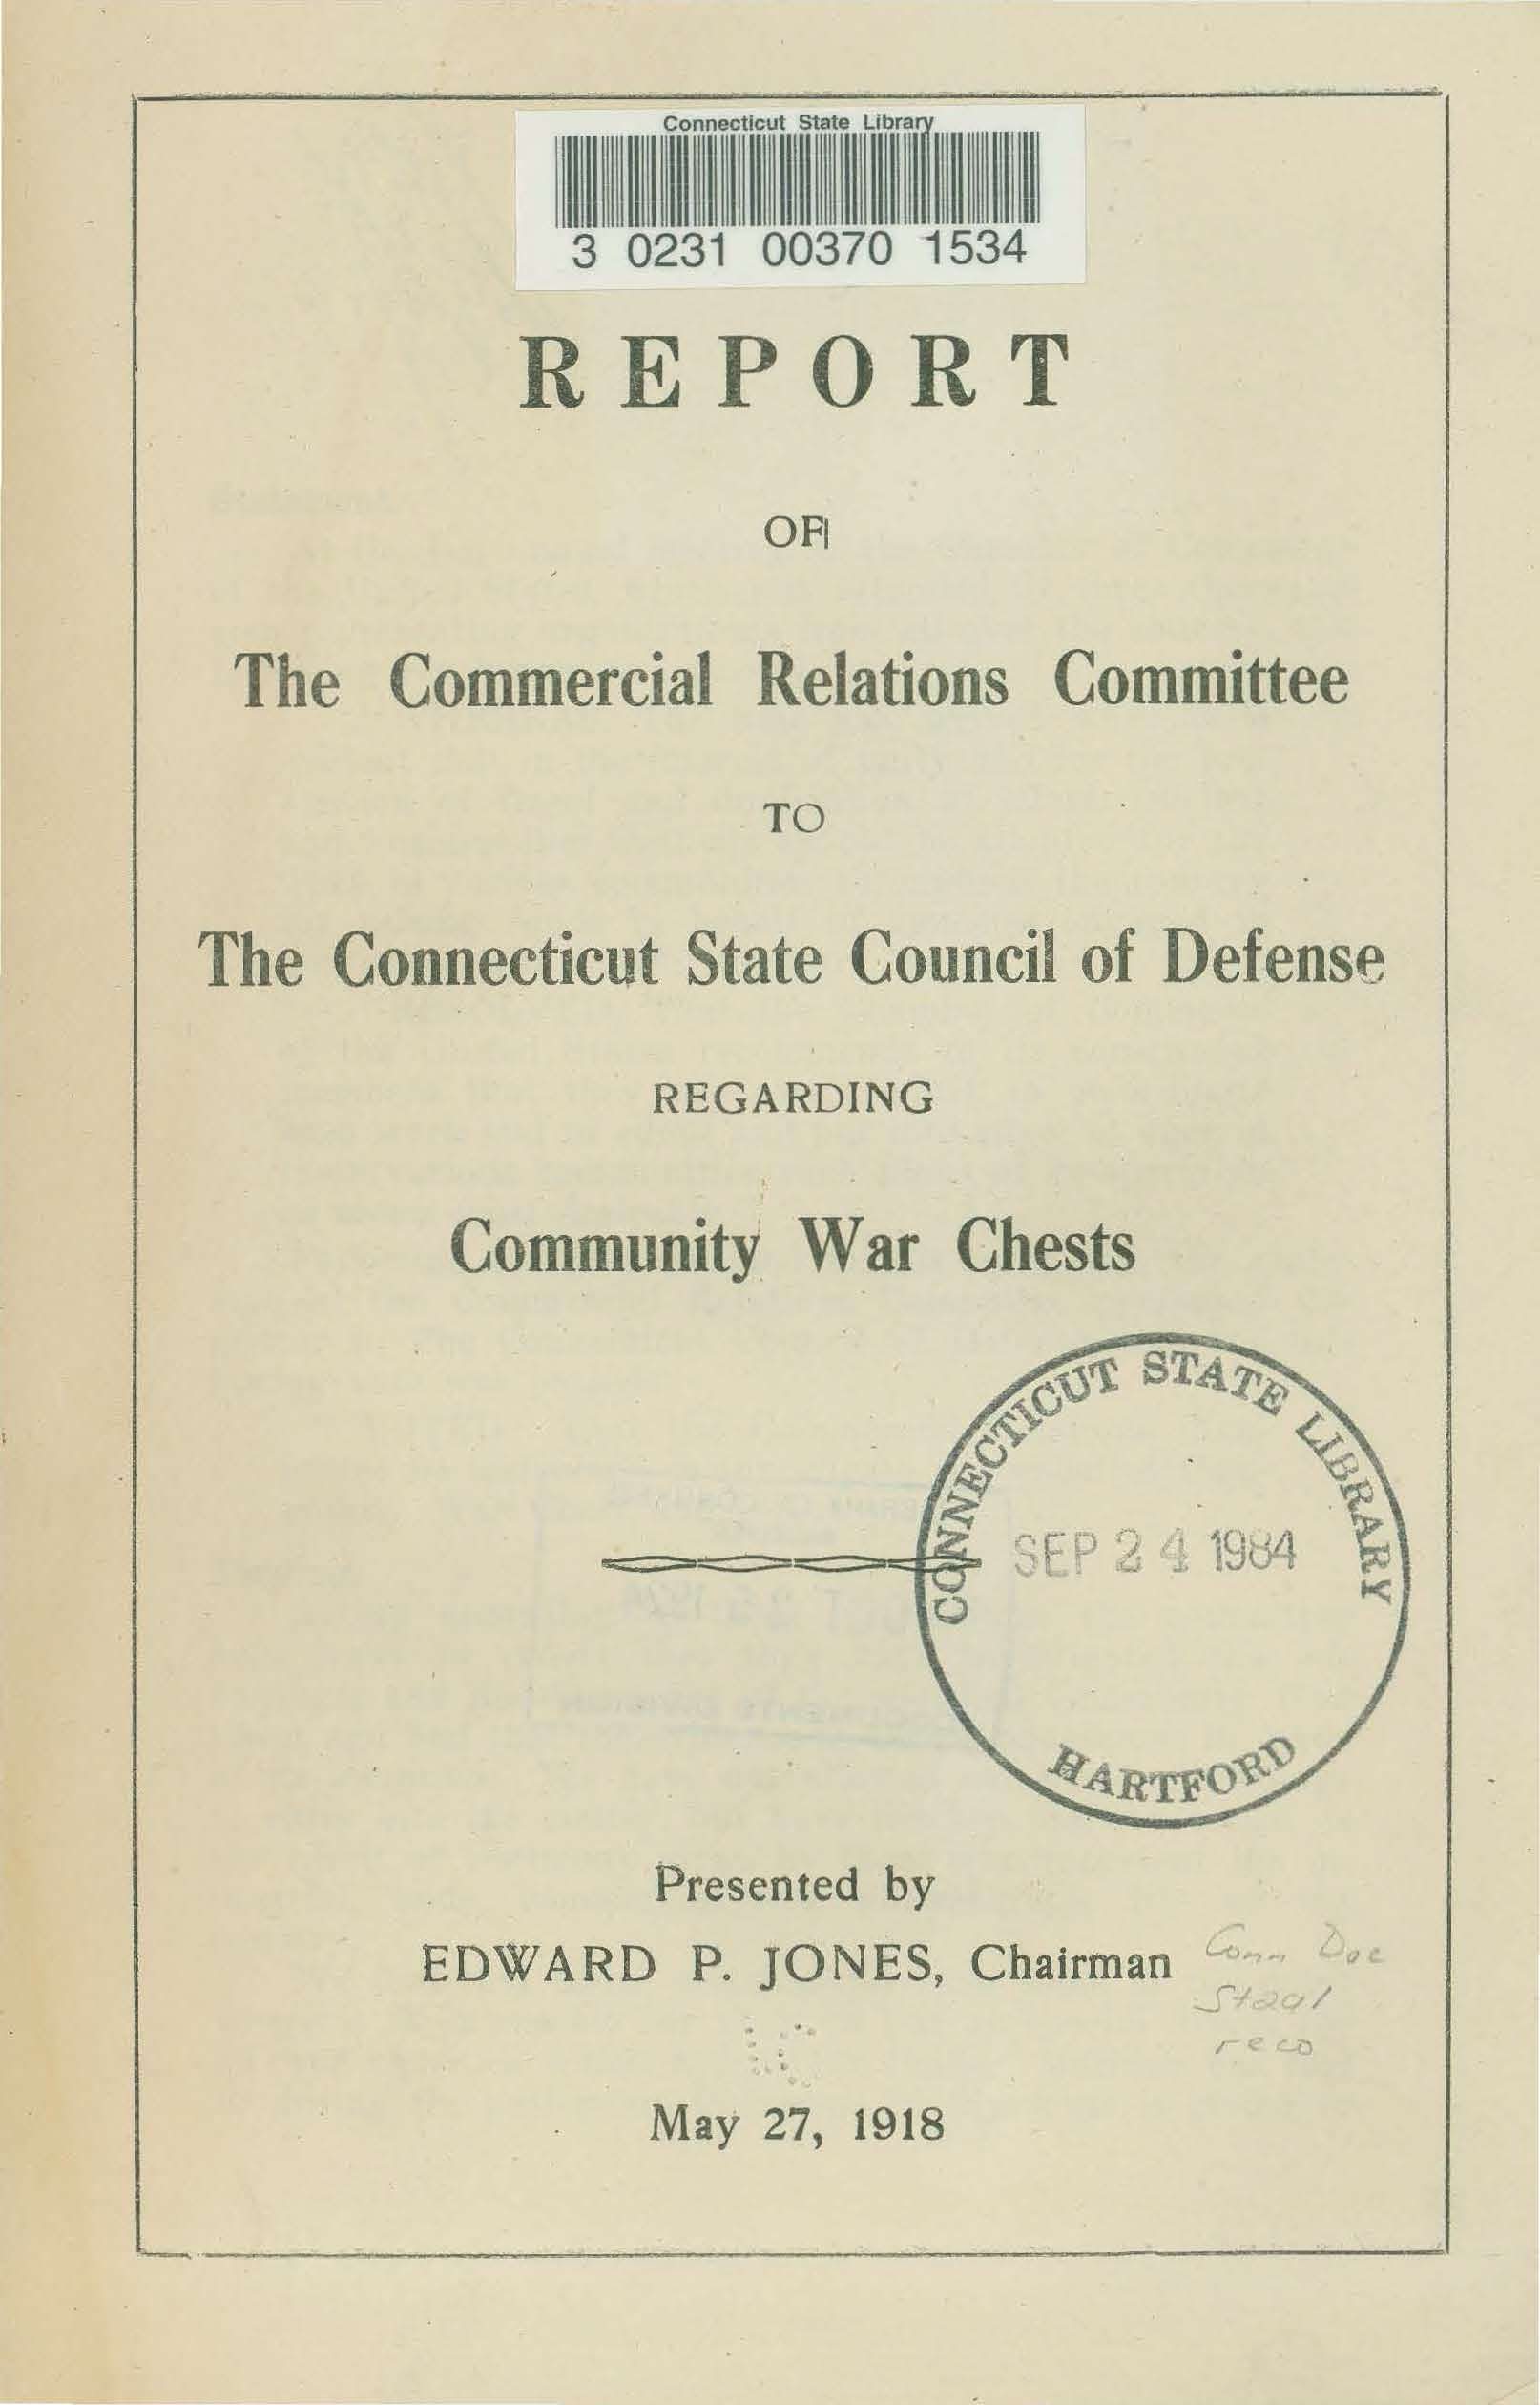 Front page image of Report of The Commercial Relation Committee to the Conn. State Council of Defense